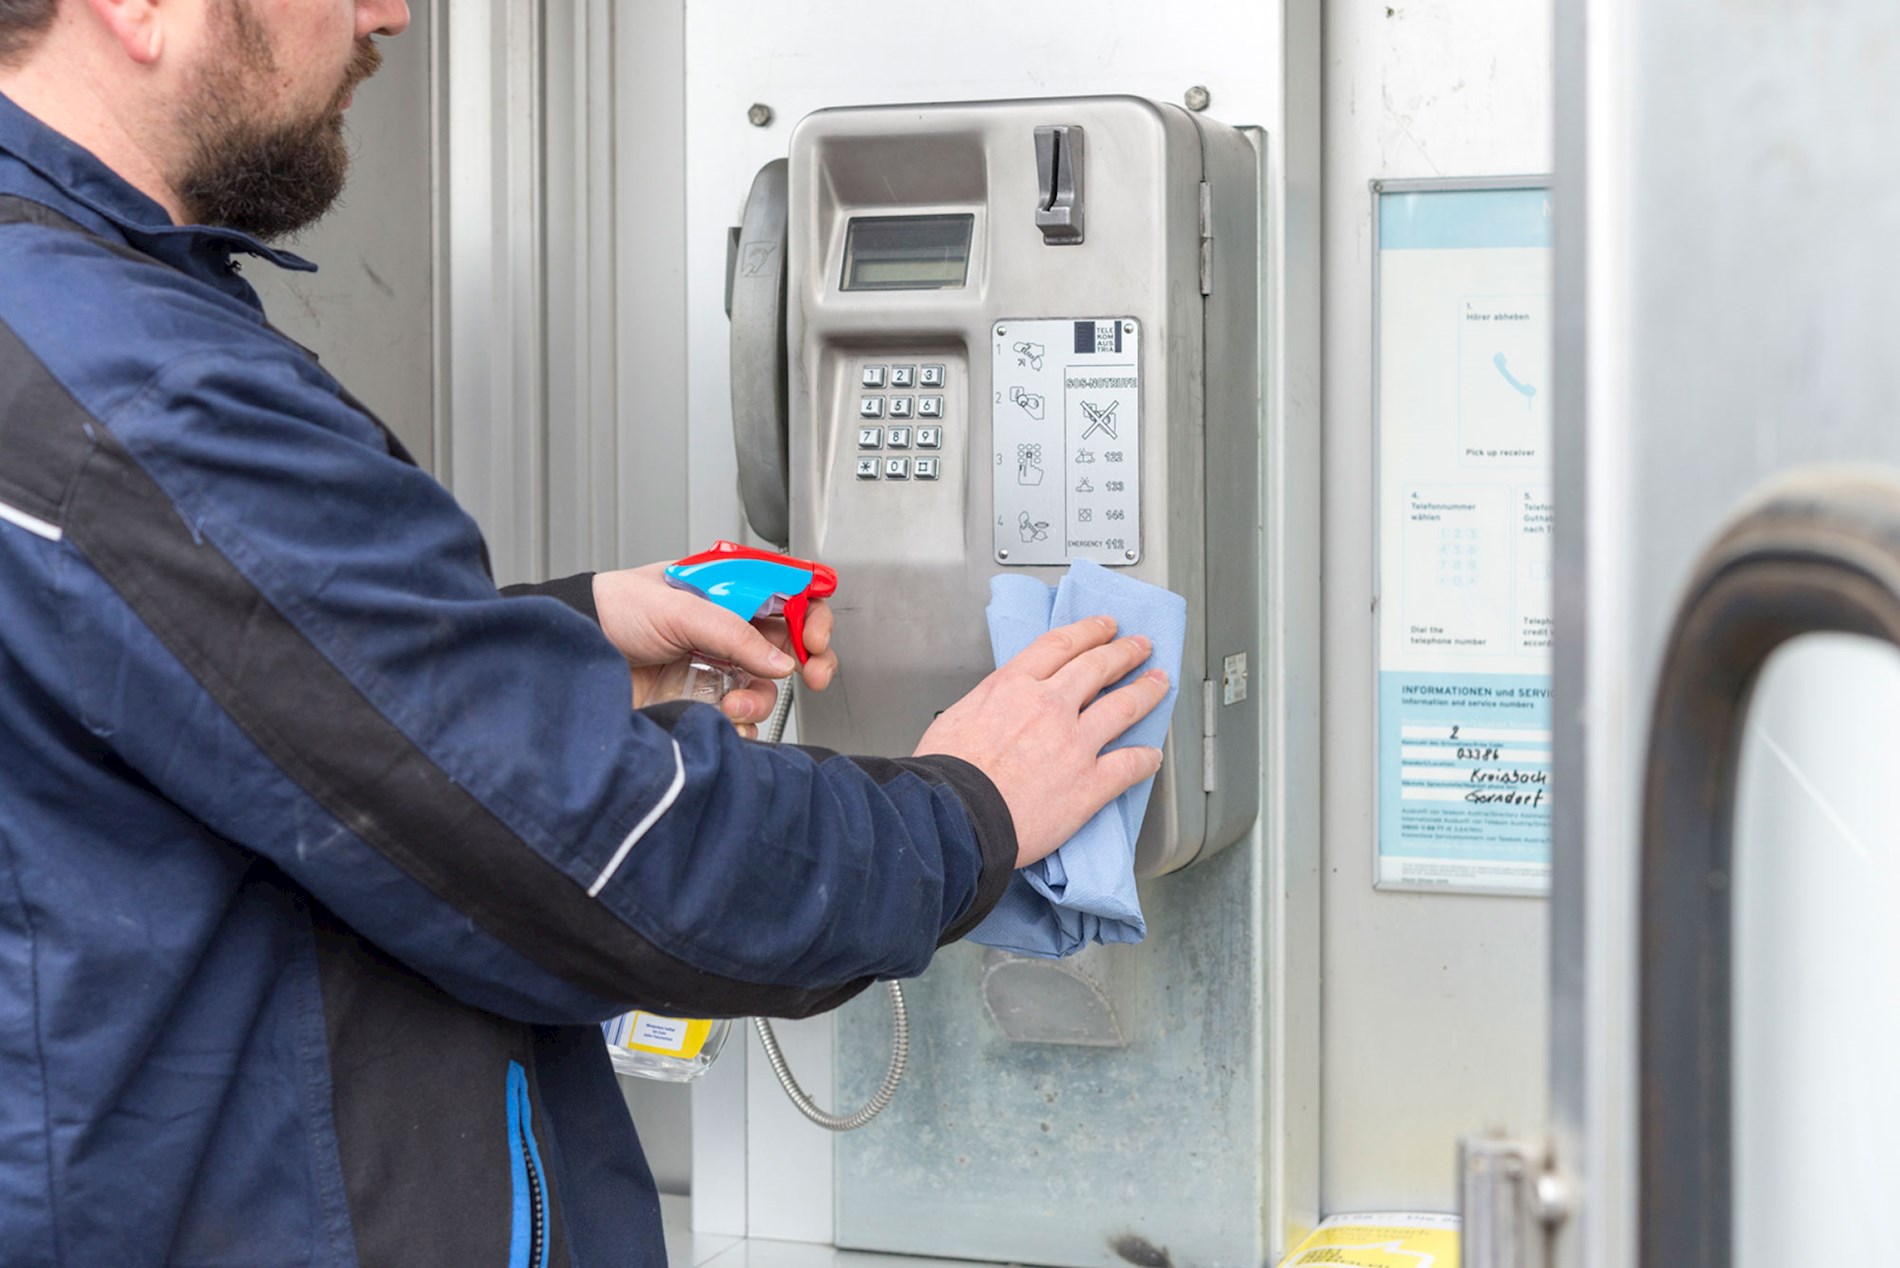 A person is cleaning the telephone in a phone booth. They are using cleaning products in a spray bottle and a light blue cloth.